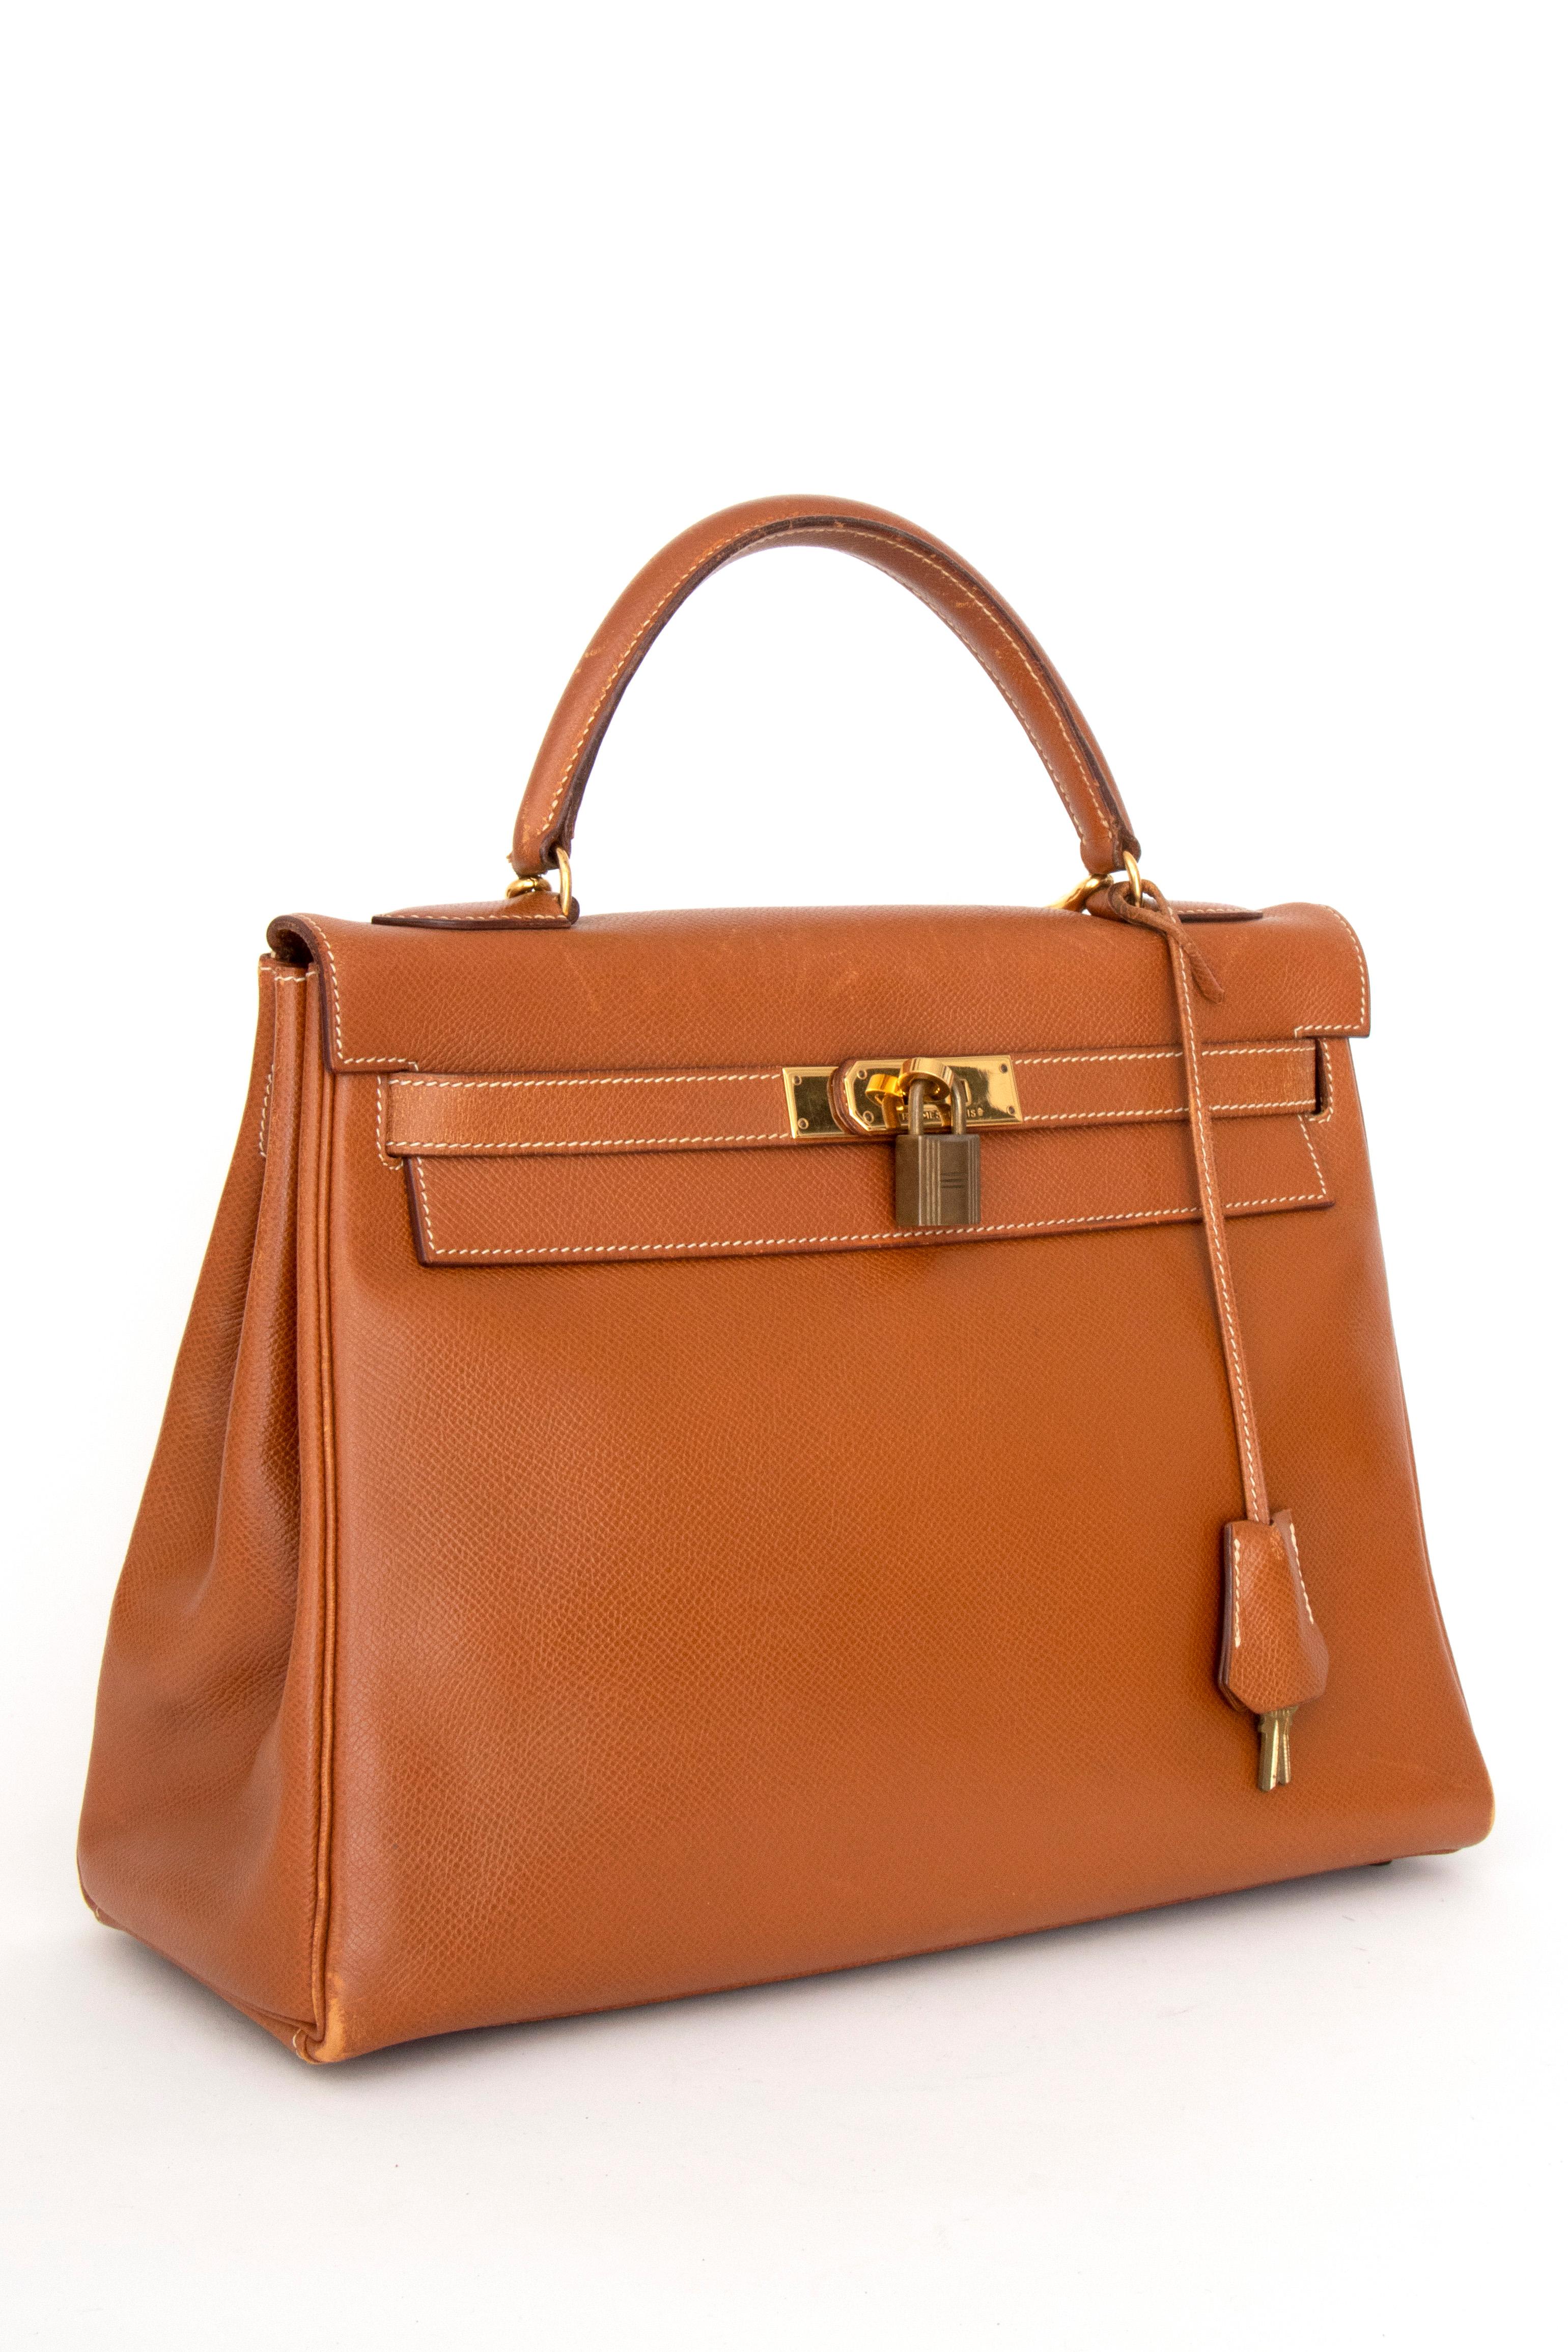 A 1990s vintage Hermès Kelly epsom handbag with gold hardware, a front toggle closure, lock and key, and a detachable strap for easier wear.

The bag has the following measurements:
Height: 23 cm
Width: 32 cm
Depth: 12 cm

This is a vintage bag